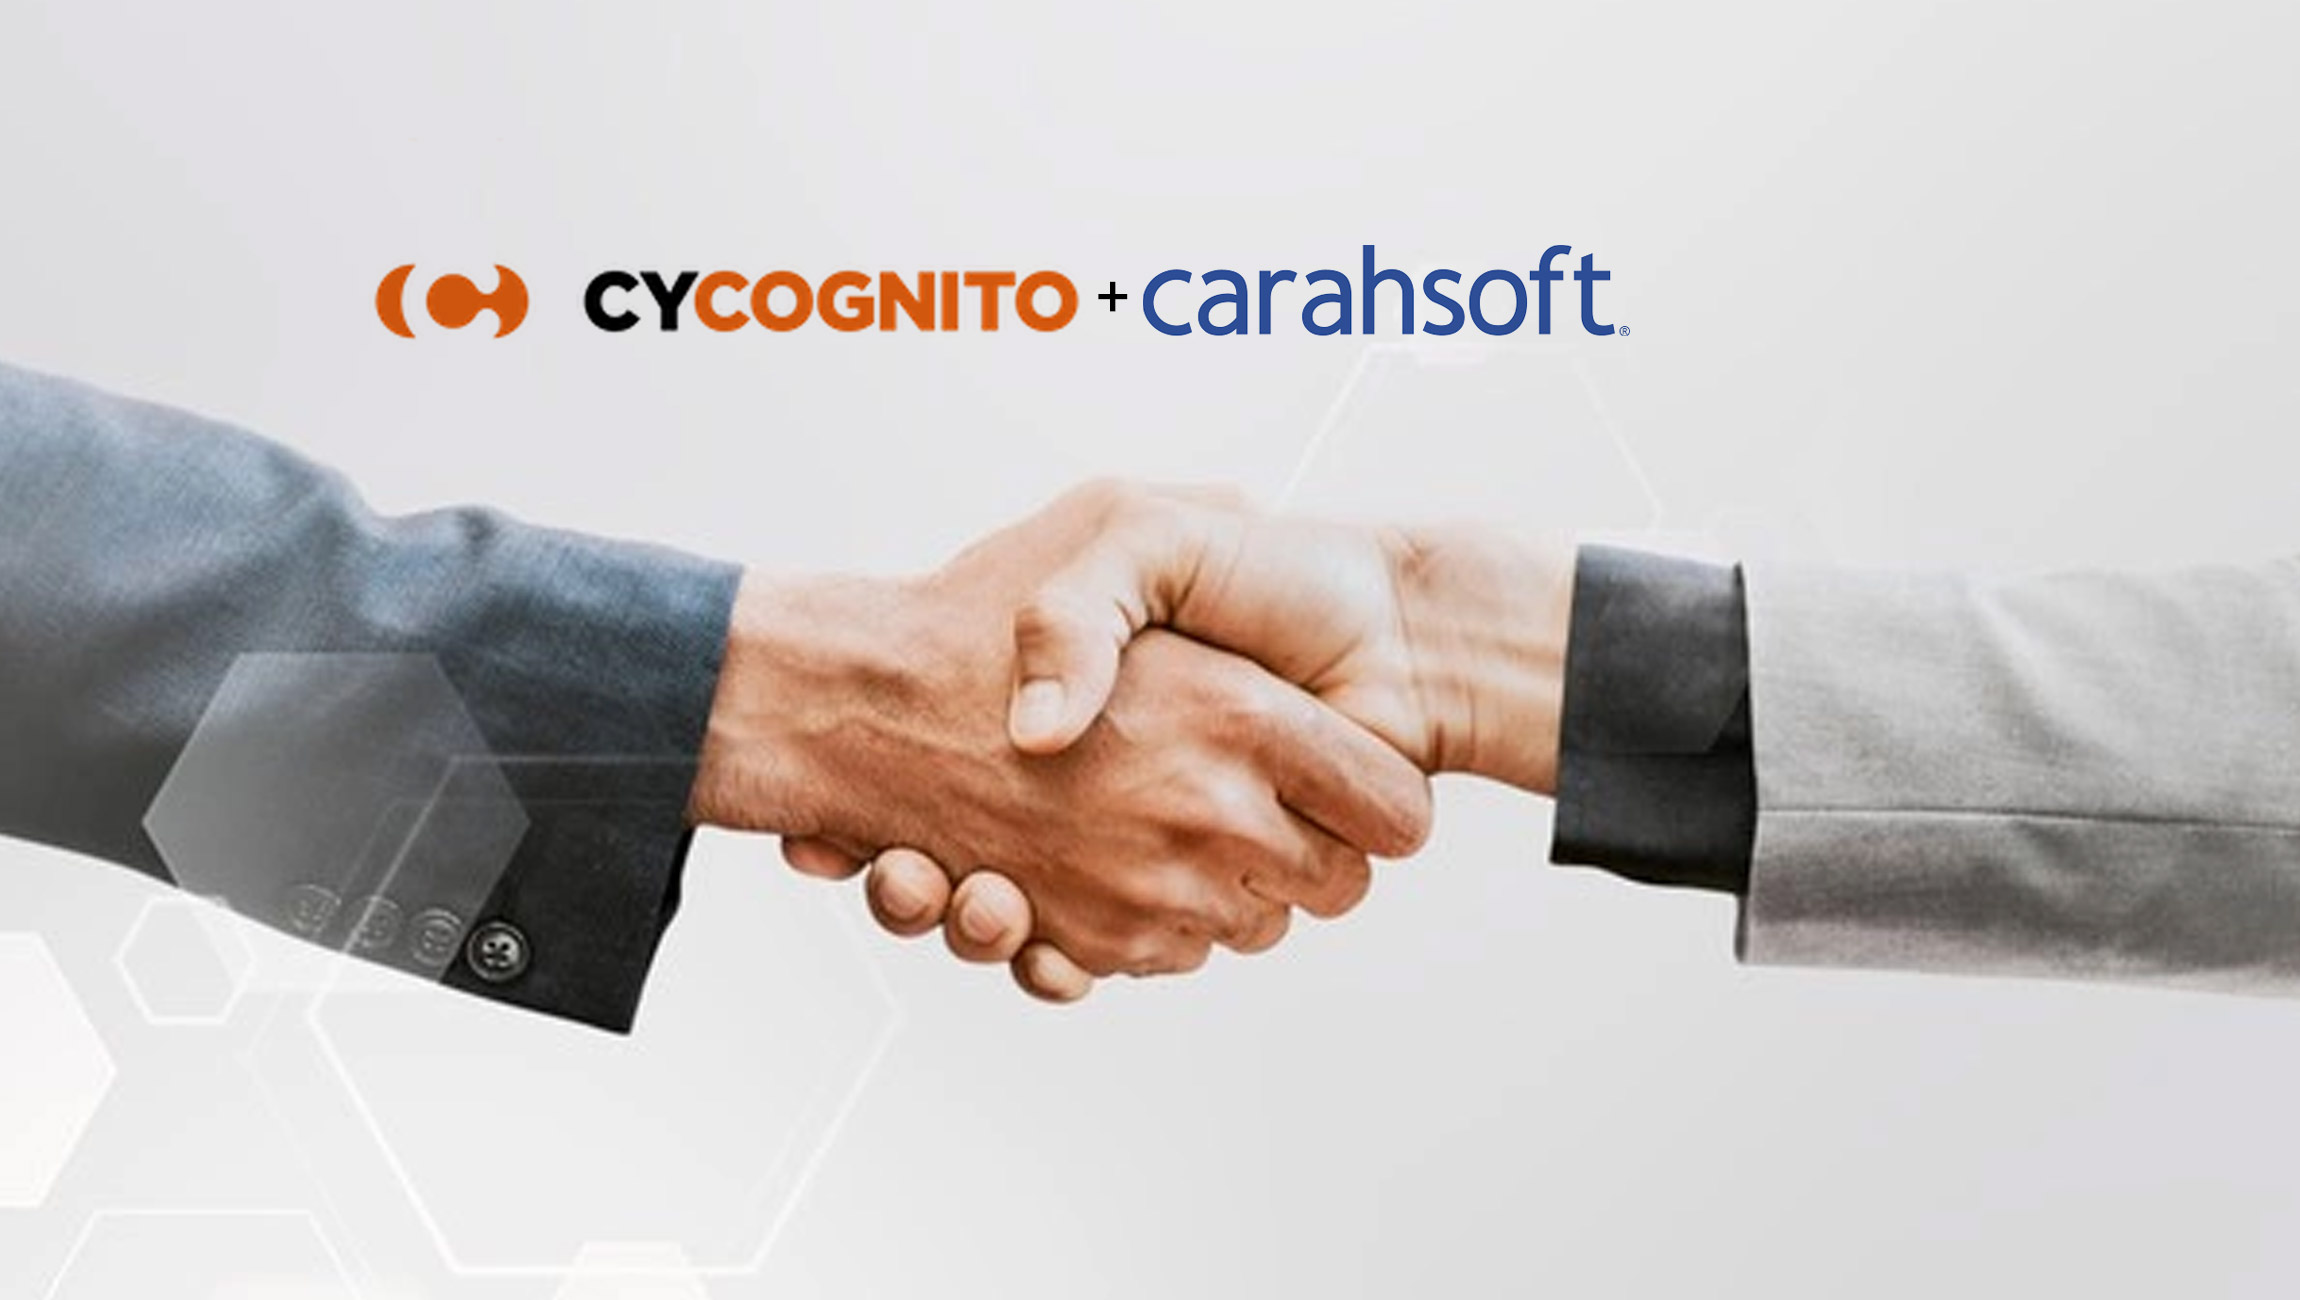 CyCognito-and-Carahsoft-Partner-to-Deliver-Attack-Surface-Management-and-Protection-Solutions-to-the-Public-Sector